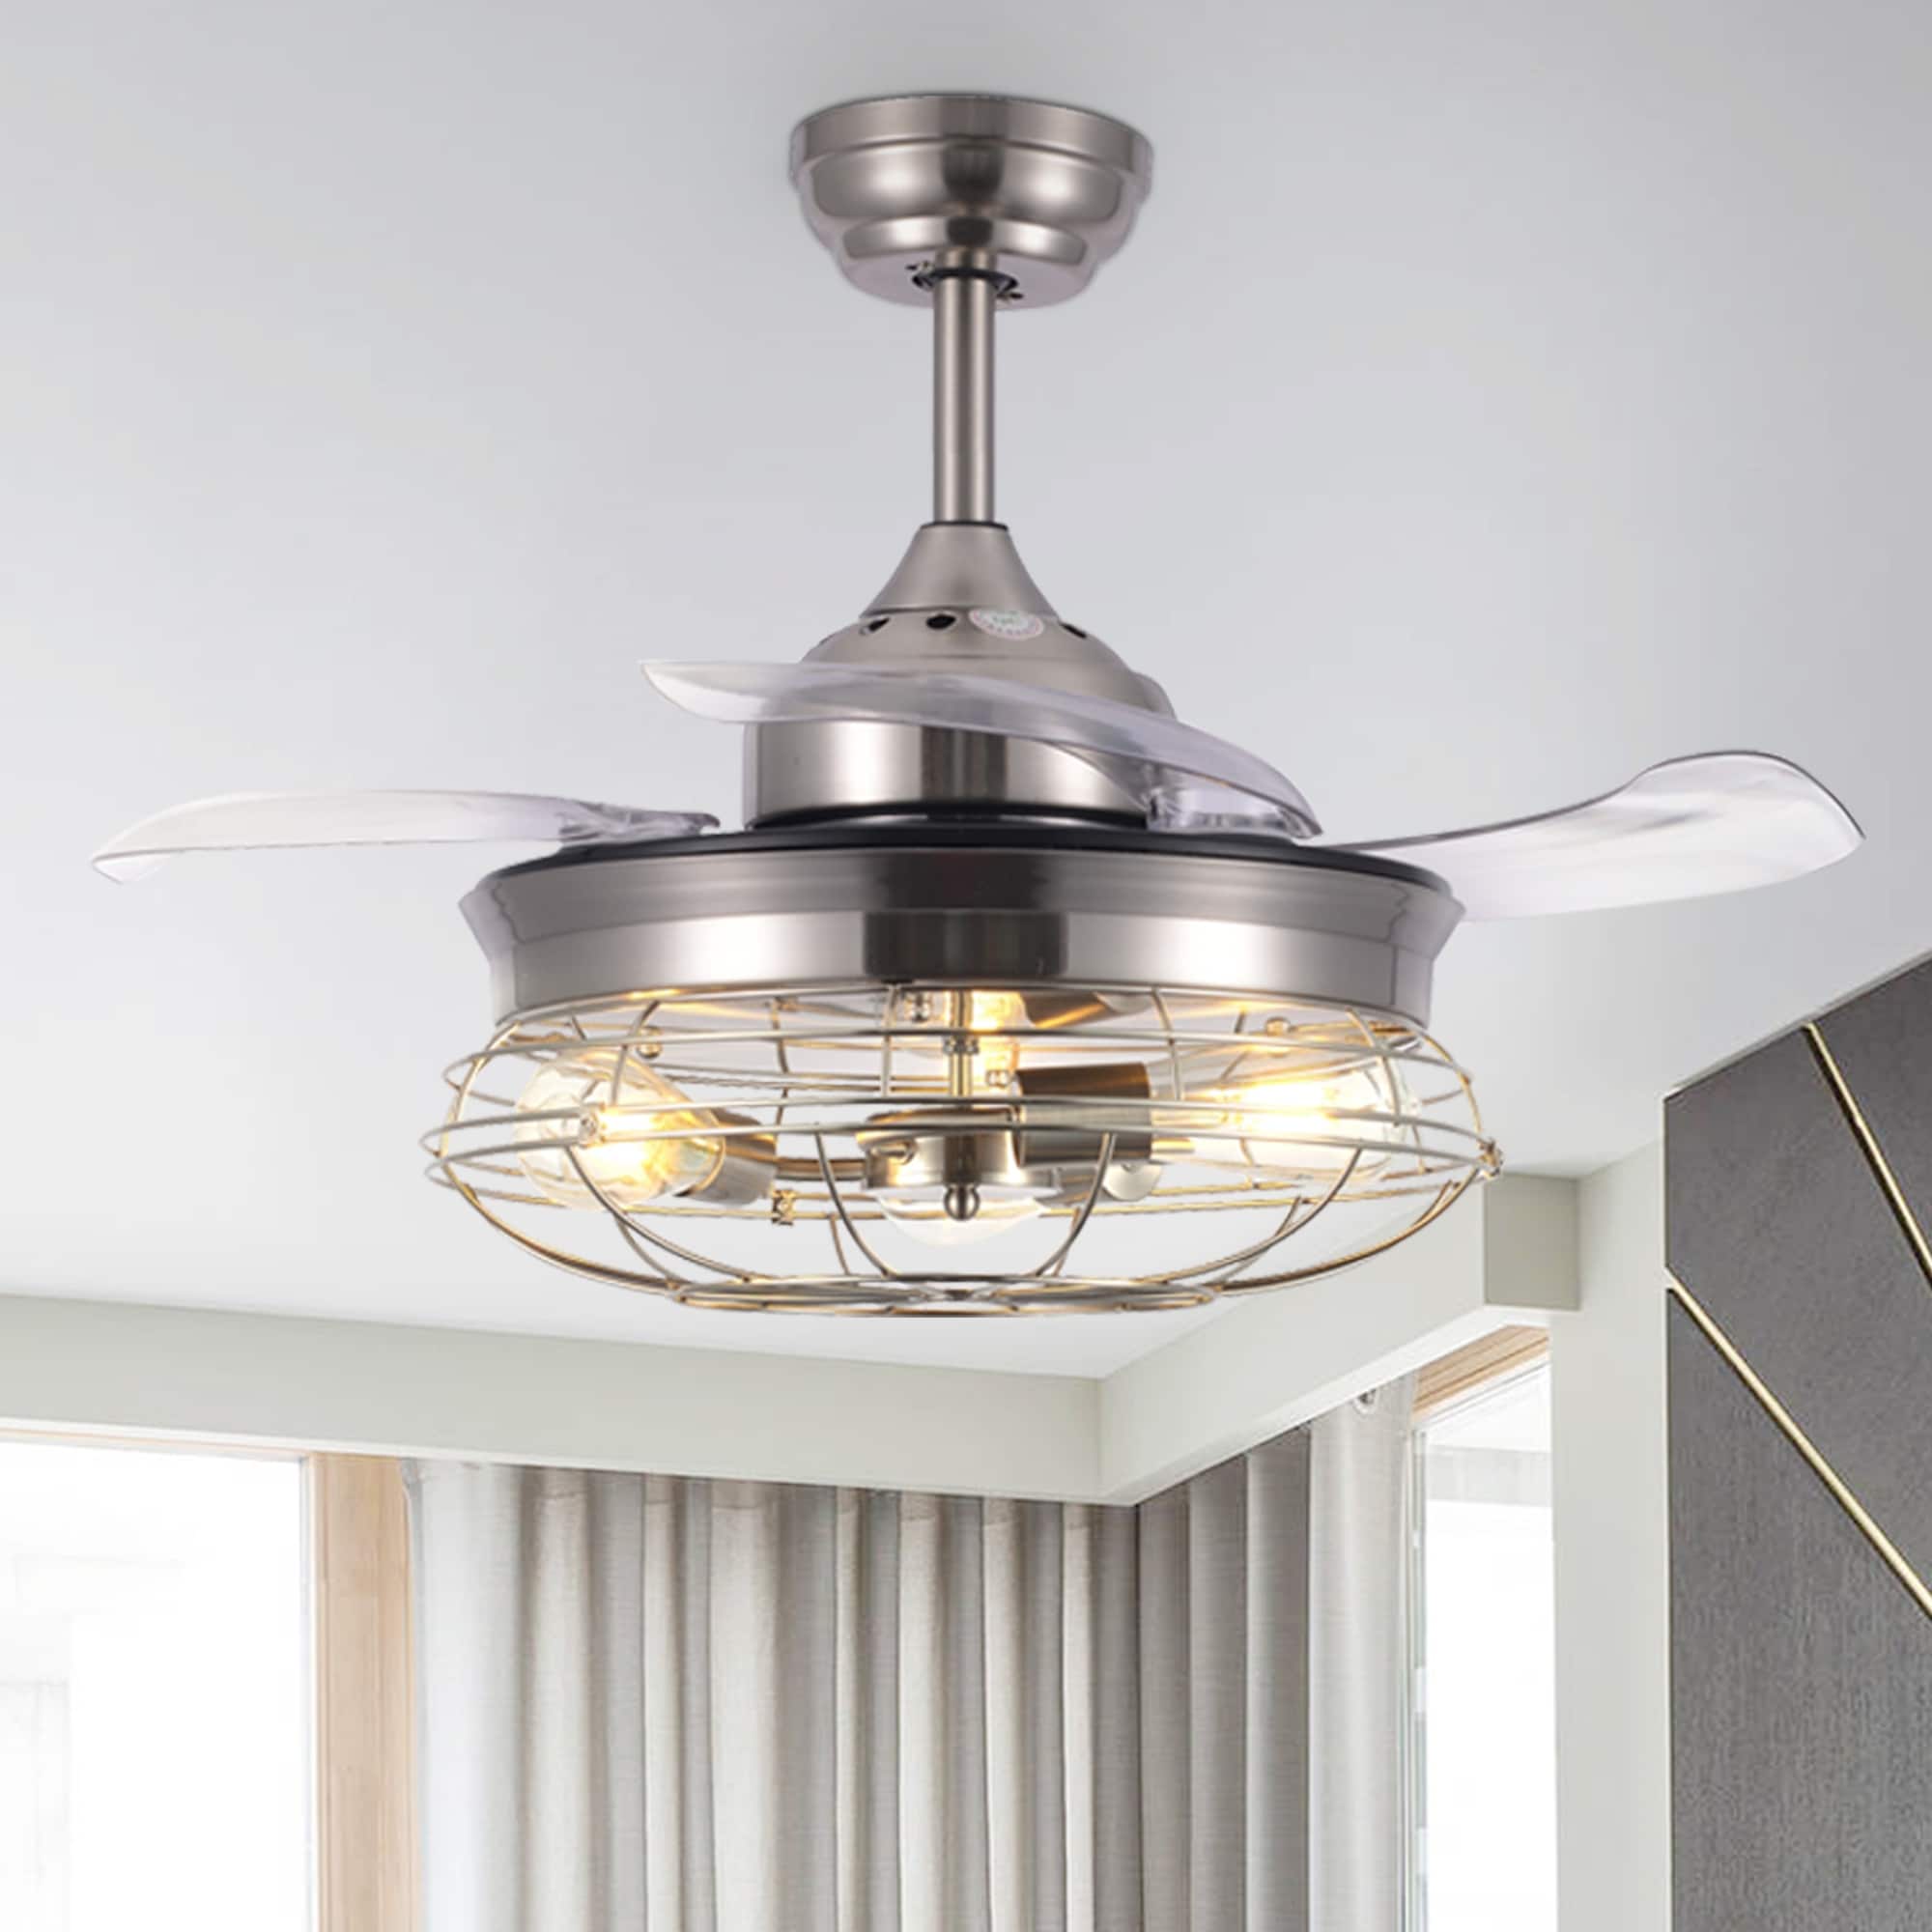 55W Controlled with Remote and Pull Chain, Hyperikon 42 Inch Ceiling Fan 